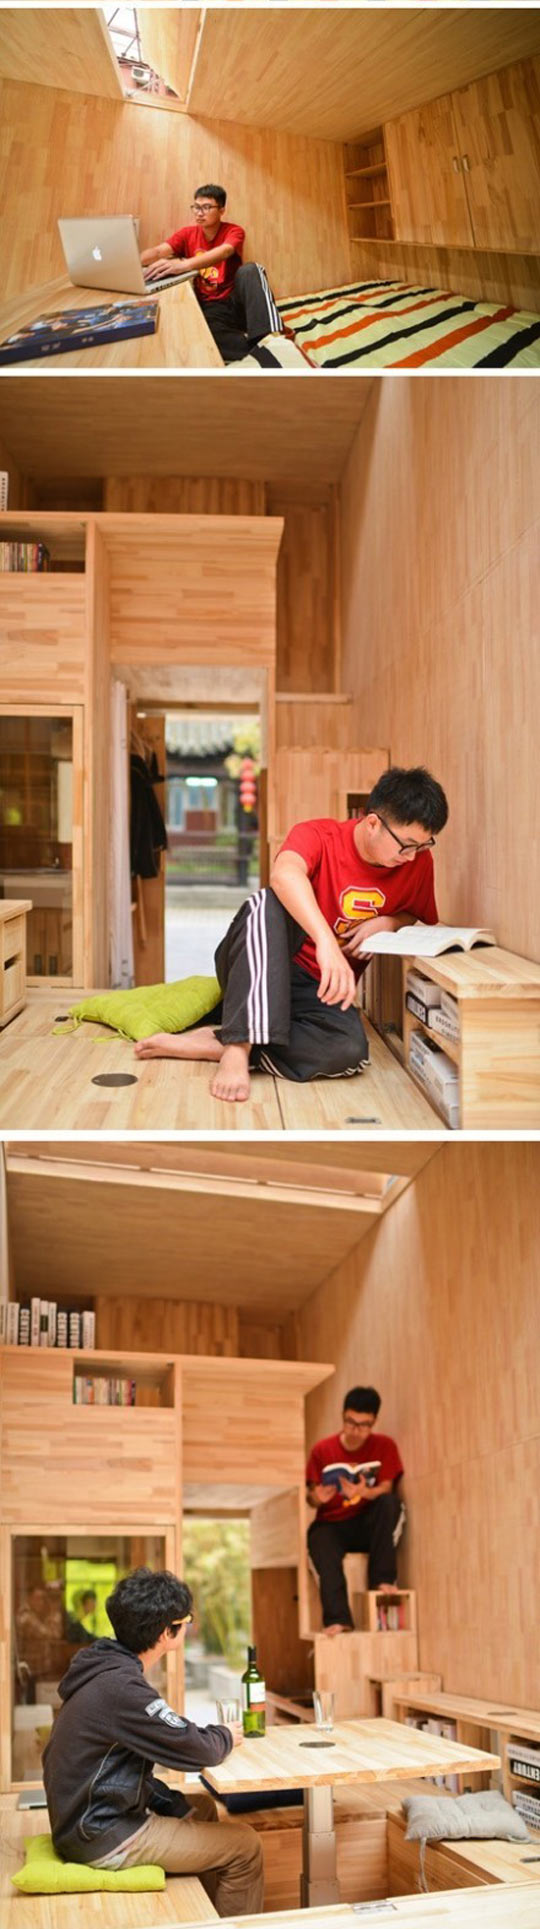 cool-wooden-house-China-small-desk